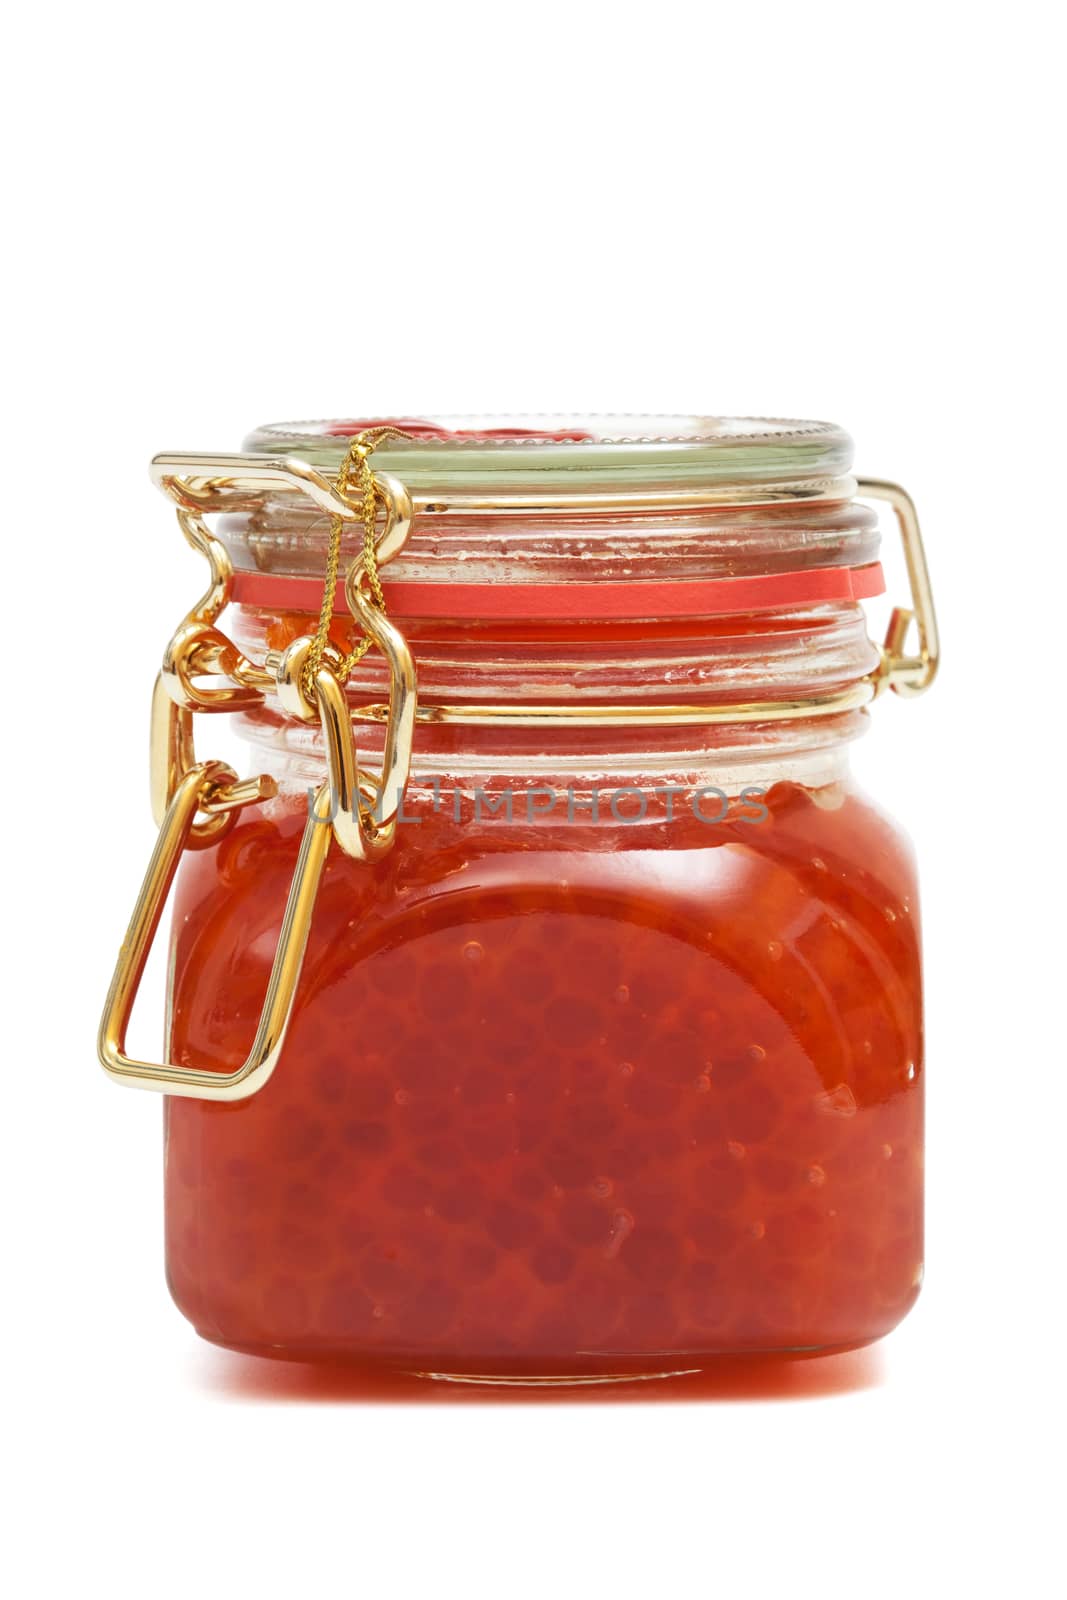 Red caviar in glass jar on a white background